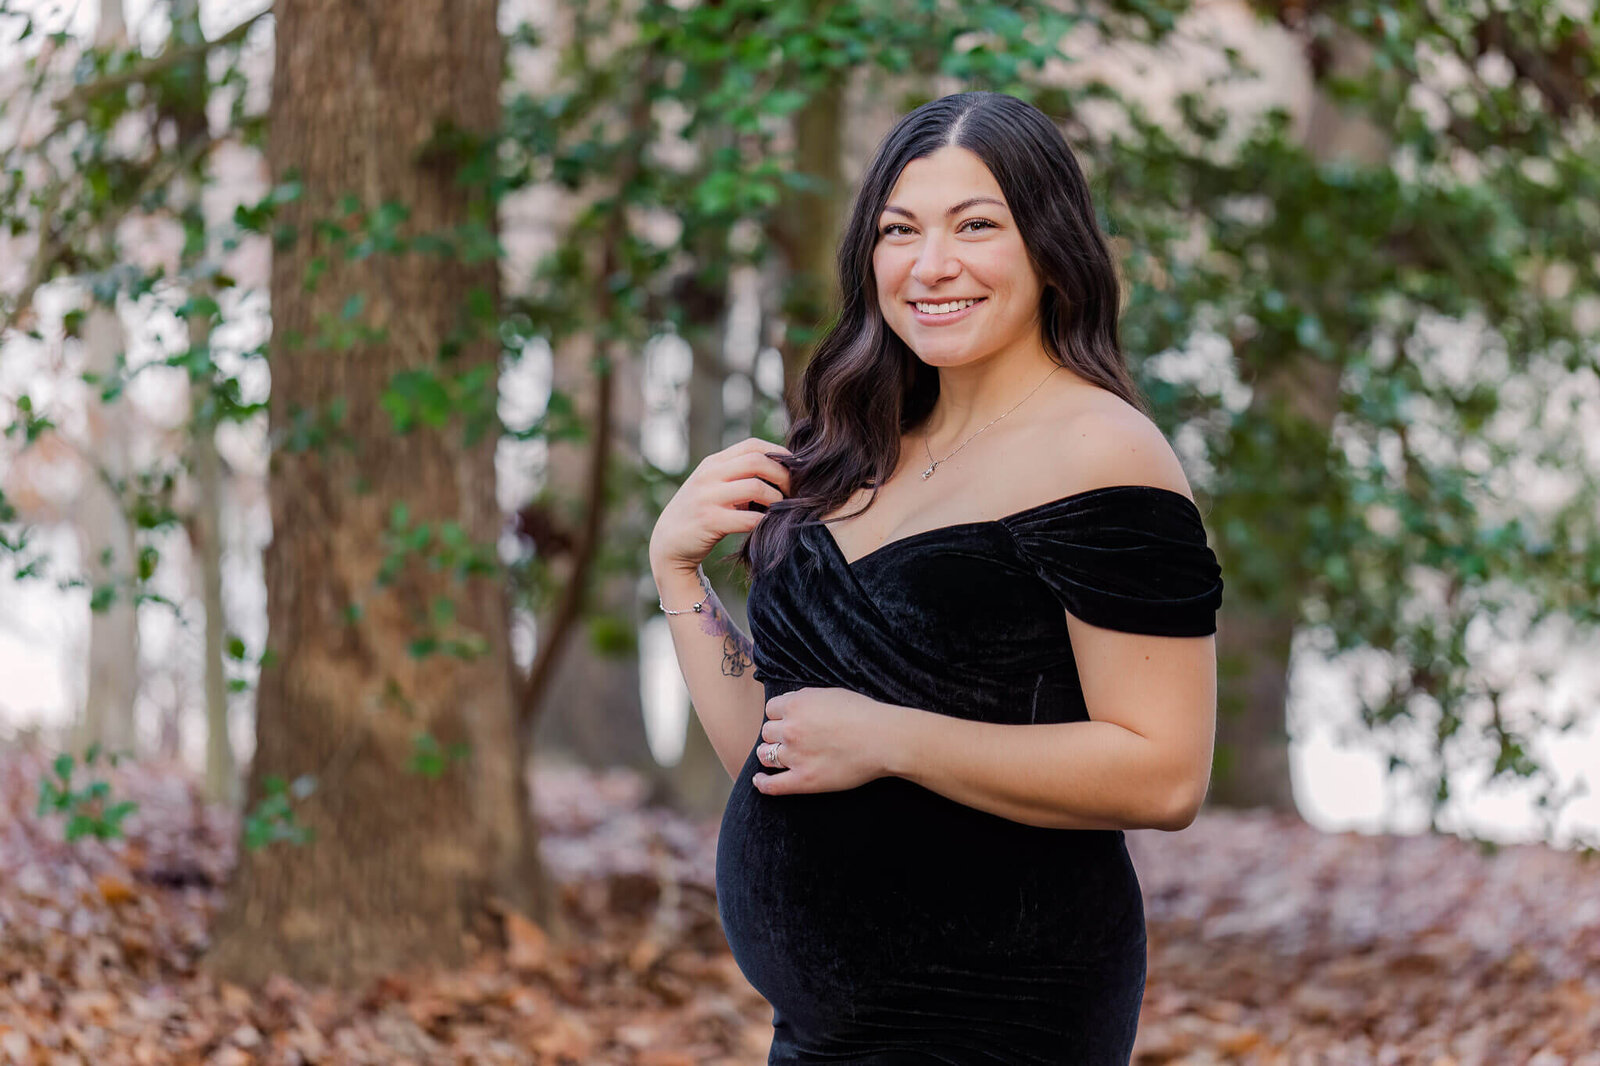 A Burke, VA maternity session of a woman in a black dress.